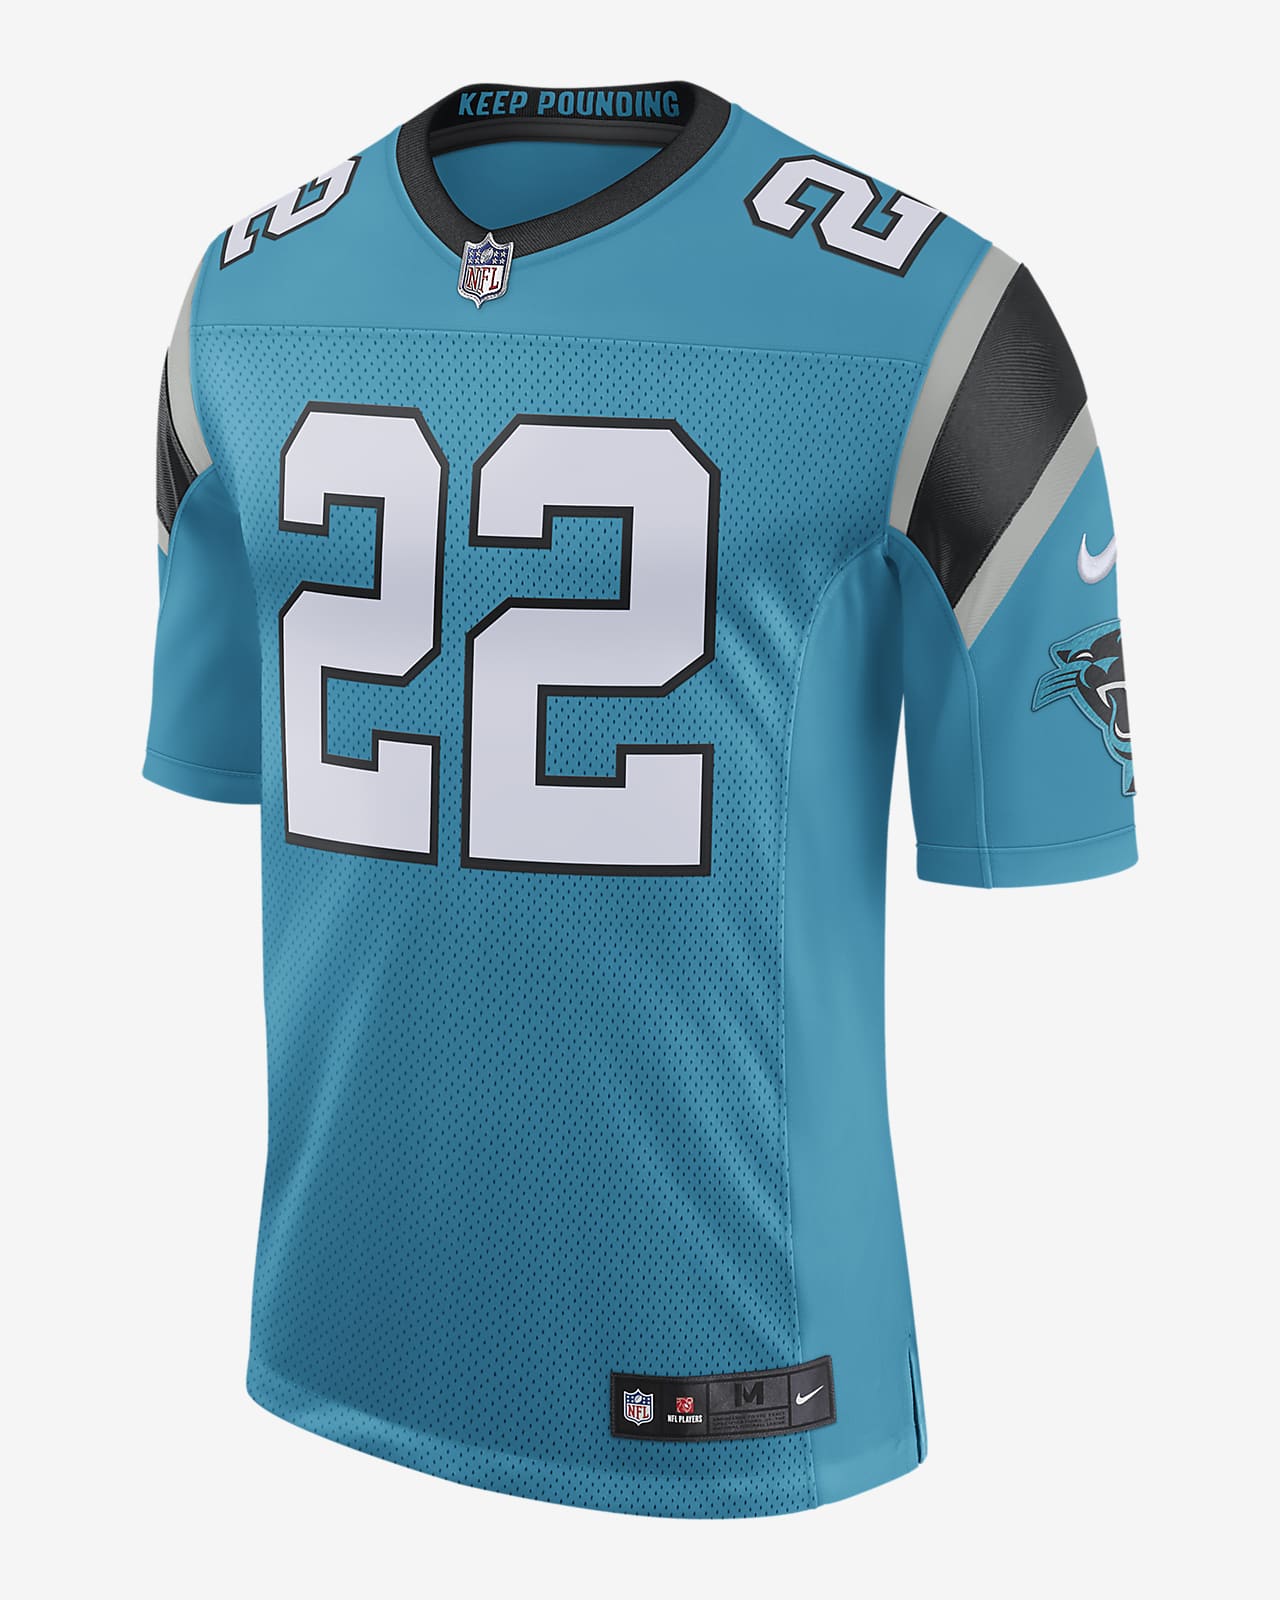 where can i get a panthers jersey